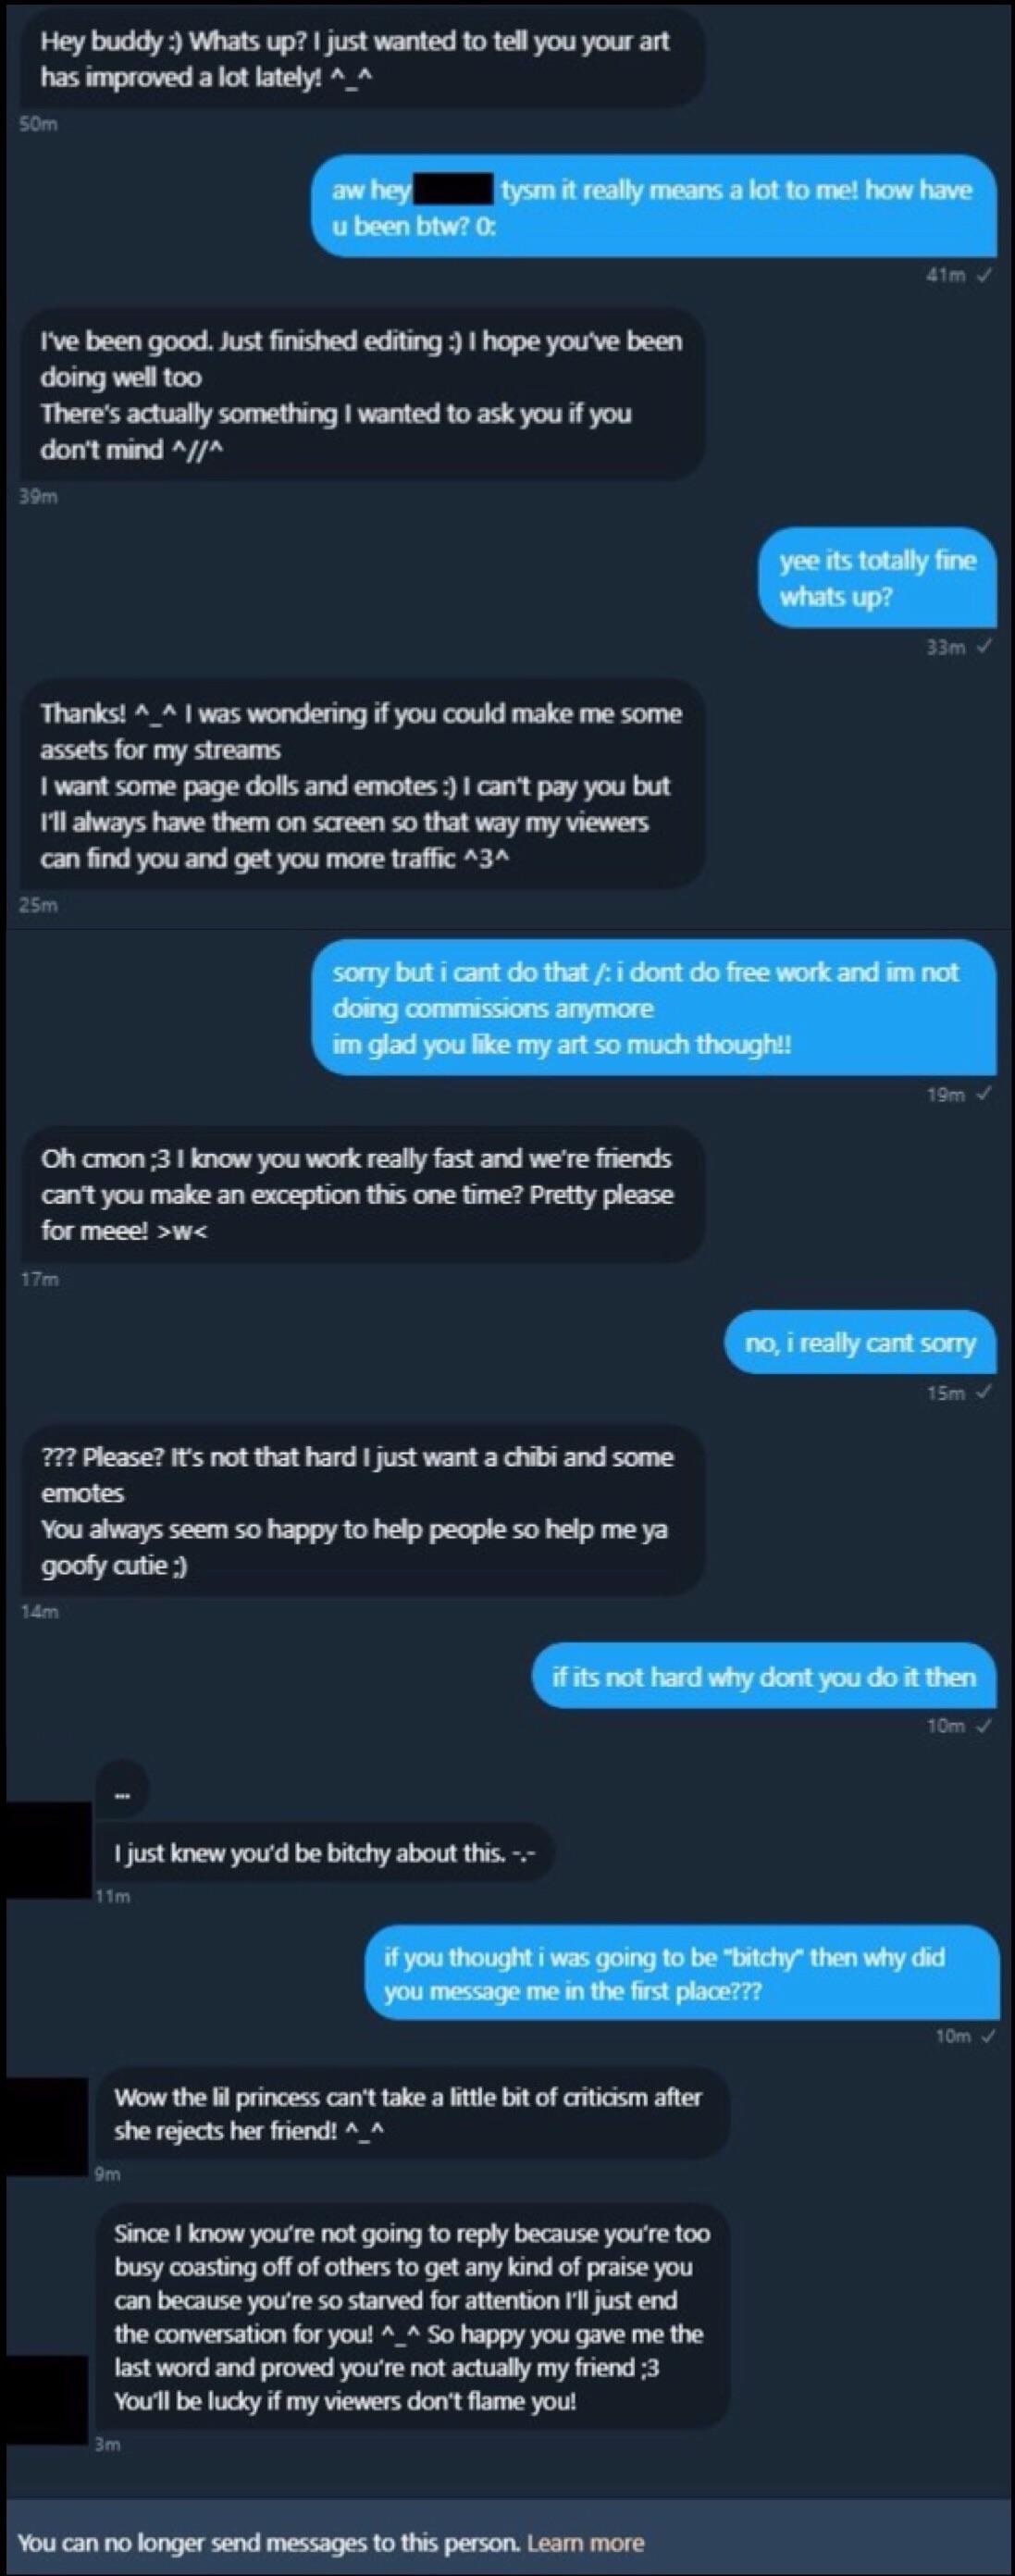 Person asks for freebie work for their website and when artist says no, person calls them bitchy and a &quot;lil princess&quot; who can&#x27;t take criticism